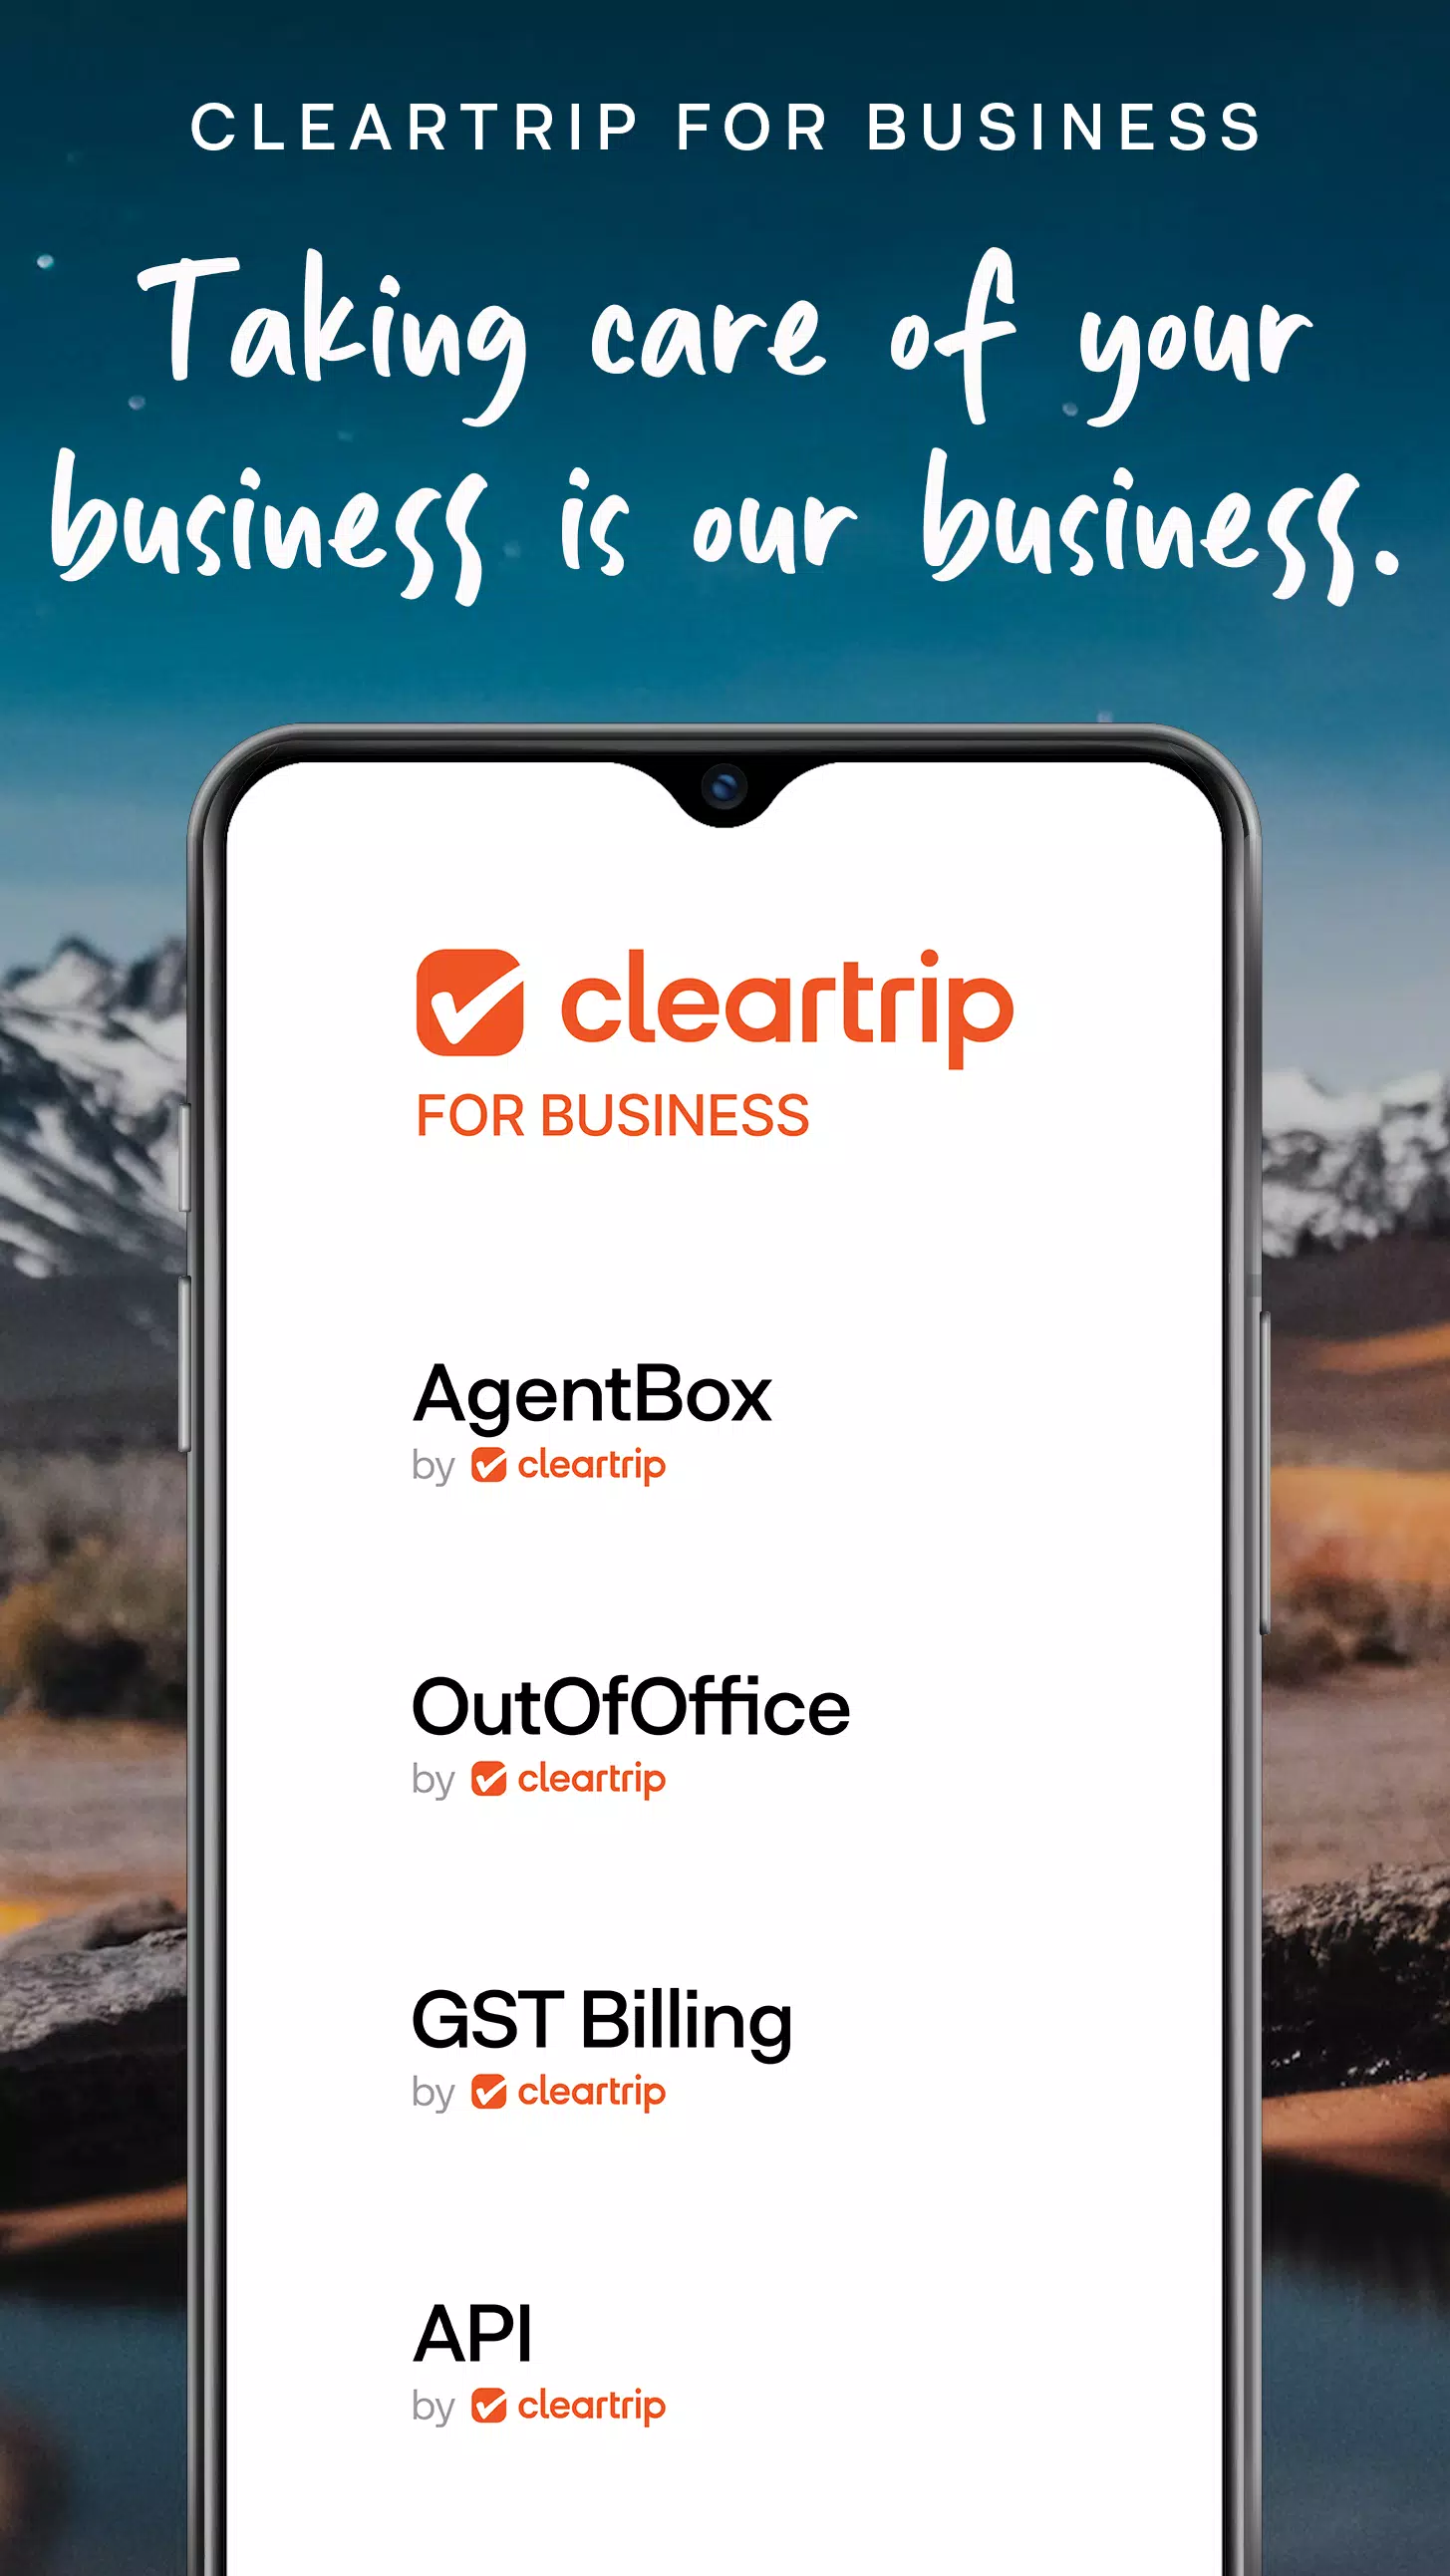 Cleartrip MOD APK Download v18.12.0 For Android – (Latest Version 3